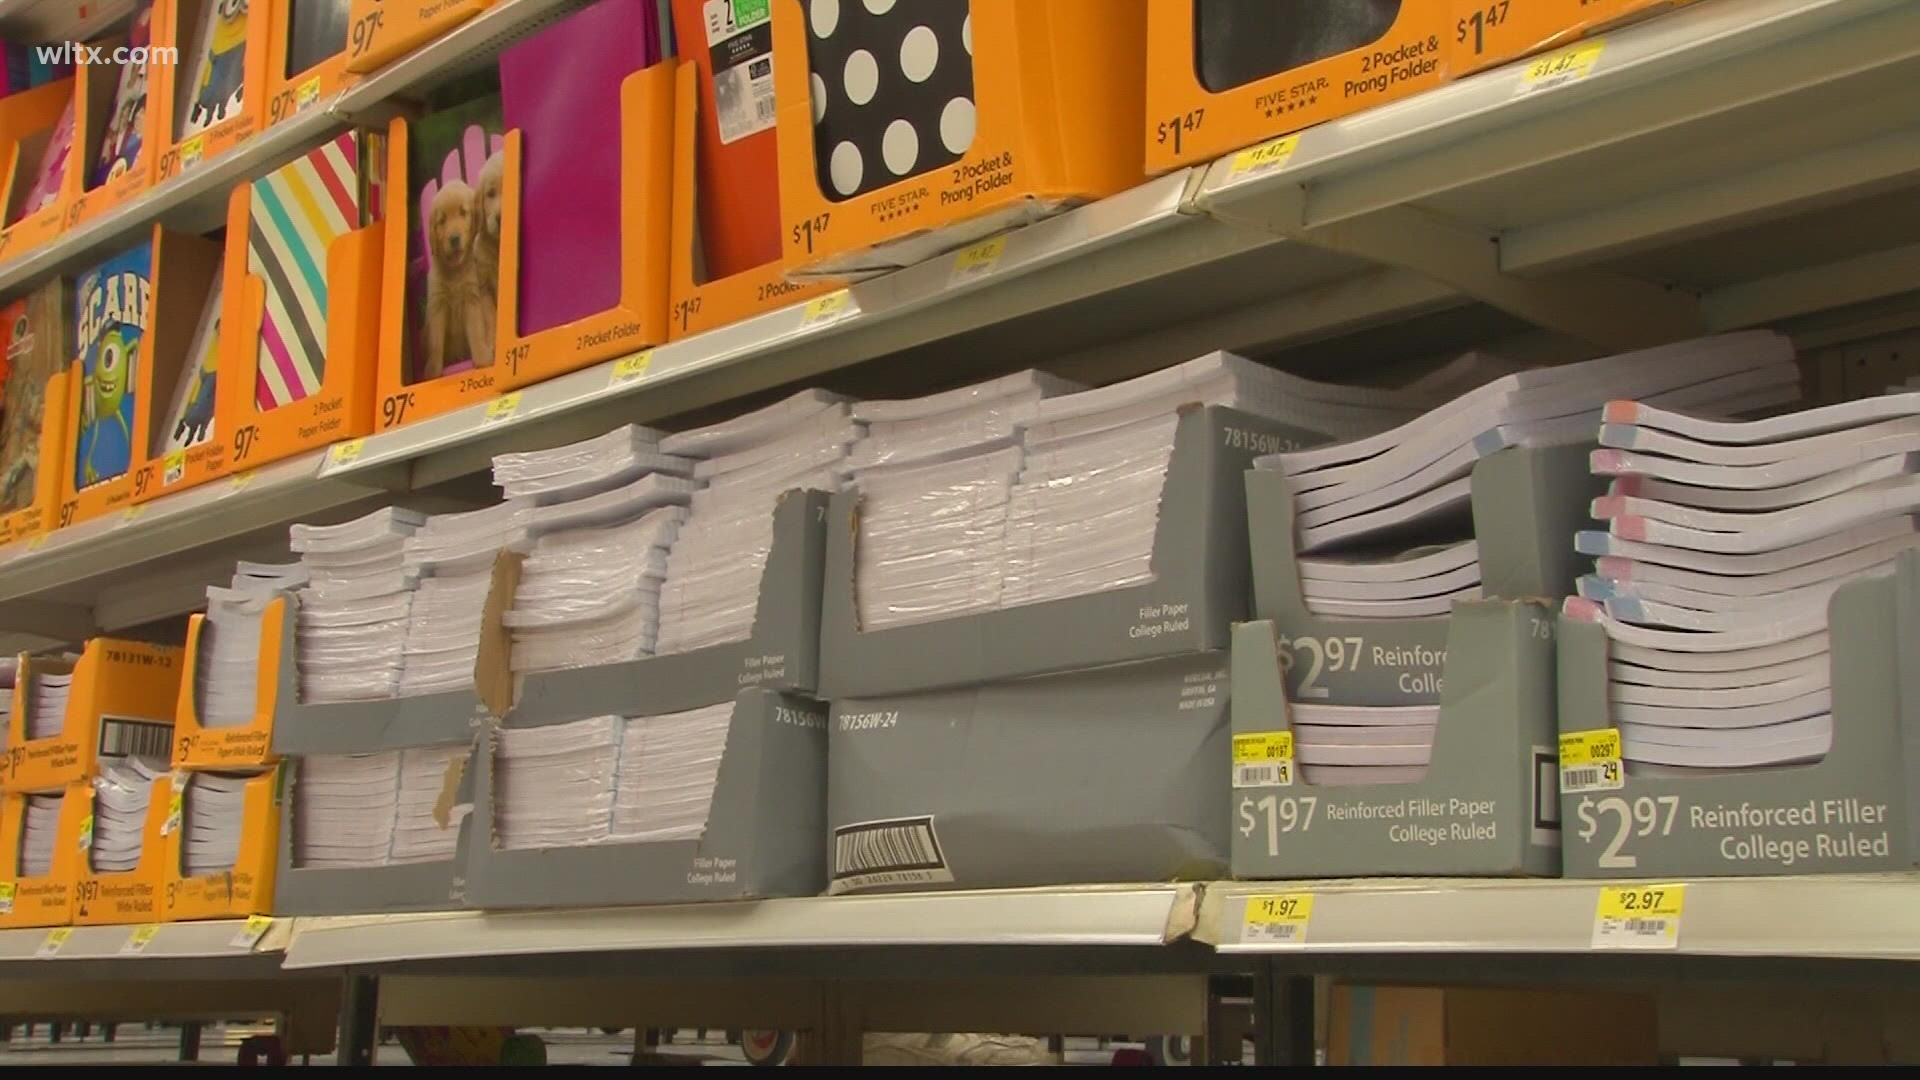 The annual Sales Tax holiday weekend in South Carolina is underway. The event is designed to give people a break on back to school shopping.